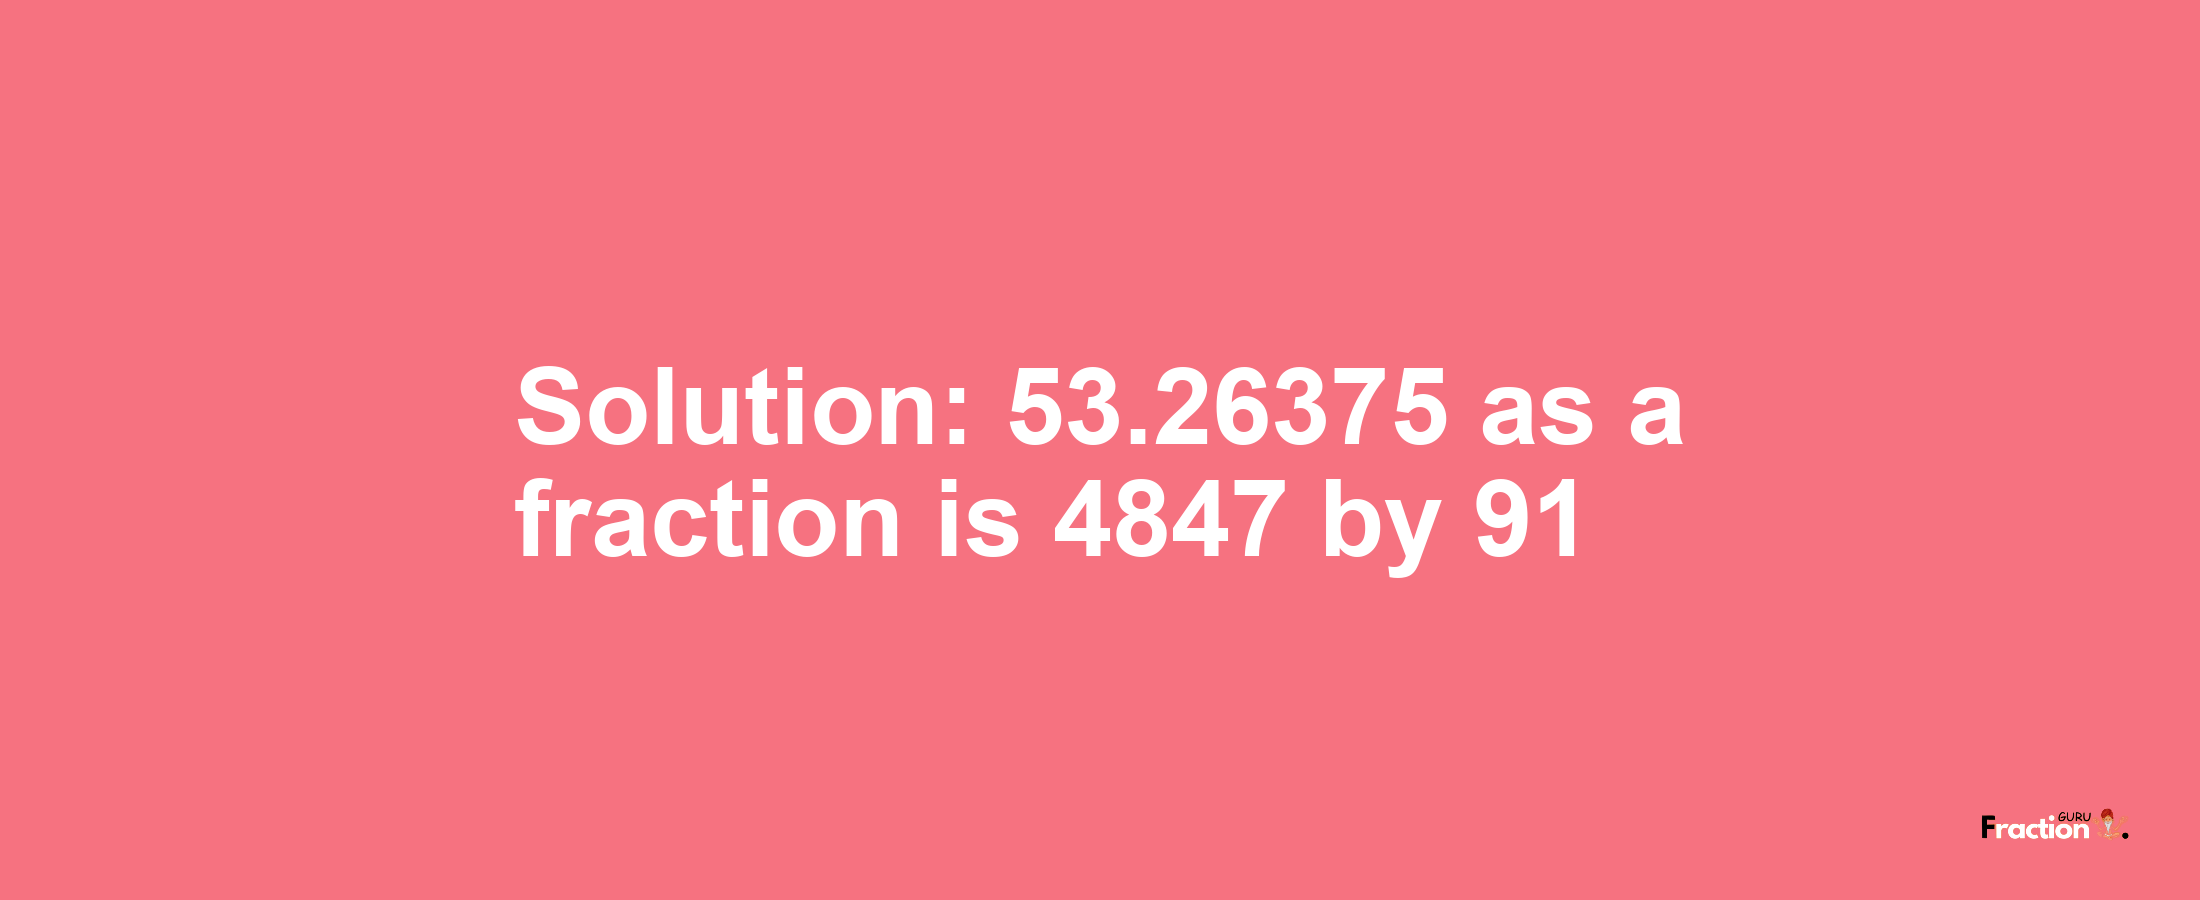 Solution:53.26375 as a fraction is 4847/91